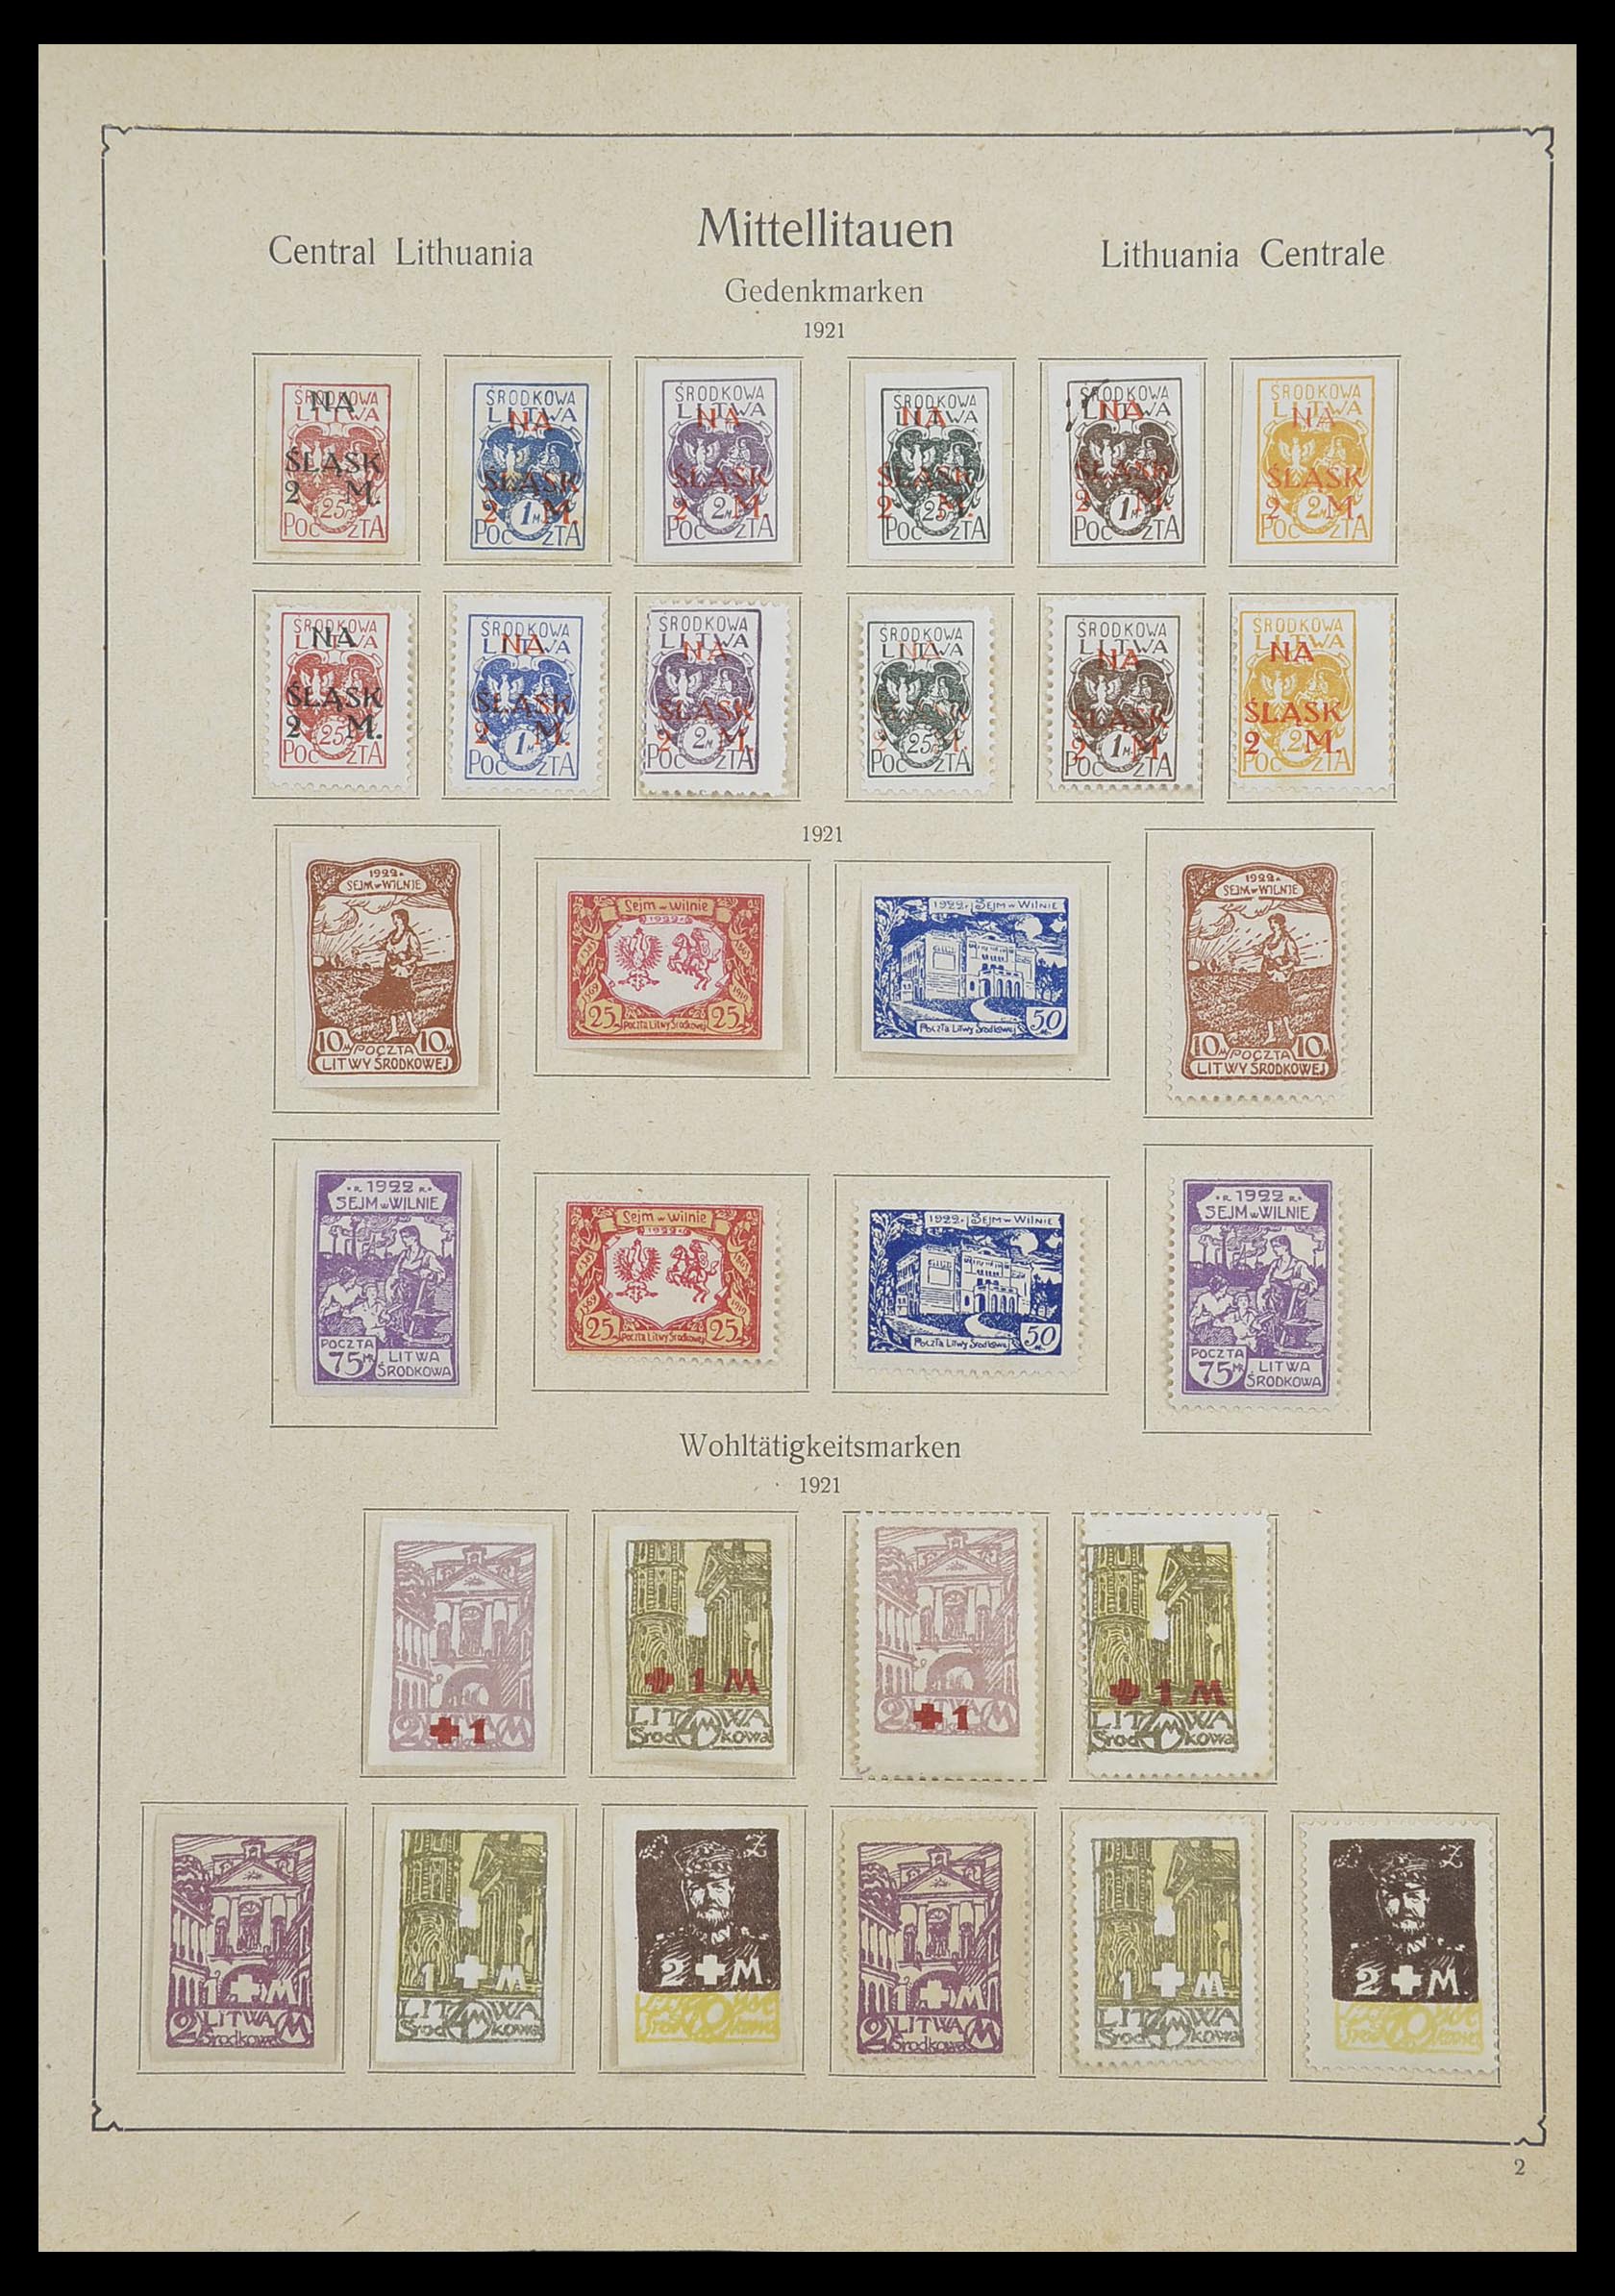 33440 002 - Stamp collection 33440 Central Lithuania 1920-1921.